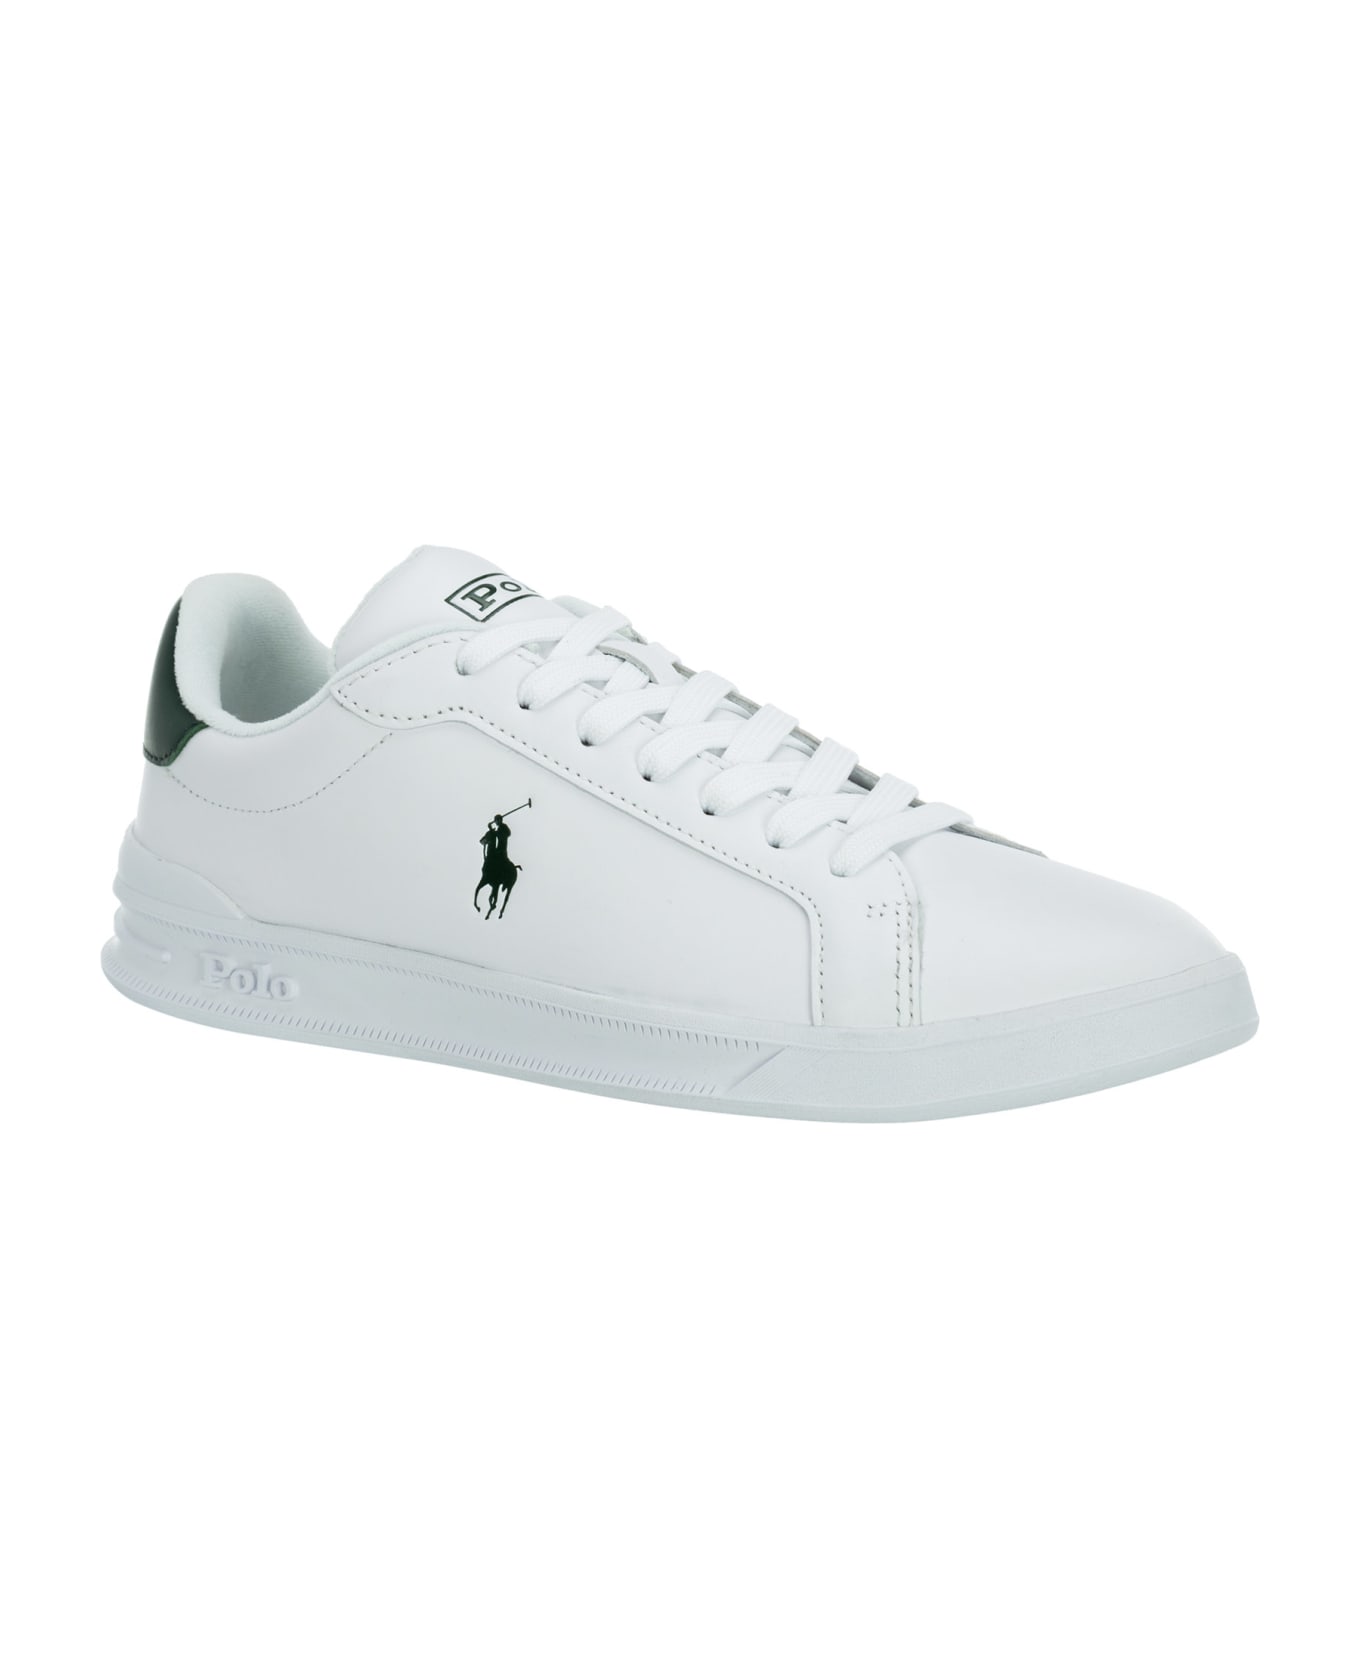 Polo Ralph Lauren Court Ii Heritage Leather Sneakers - White/green